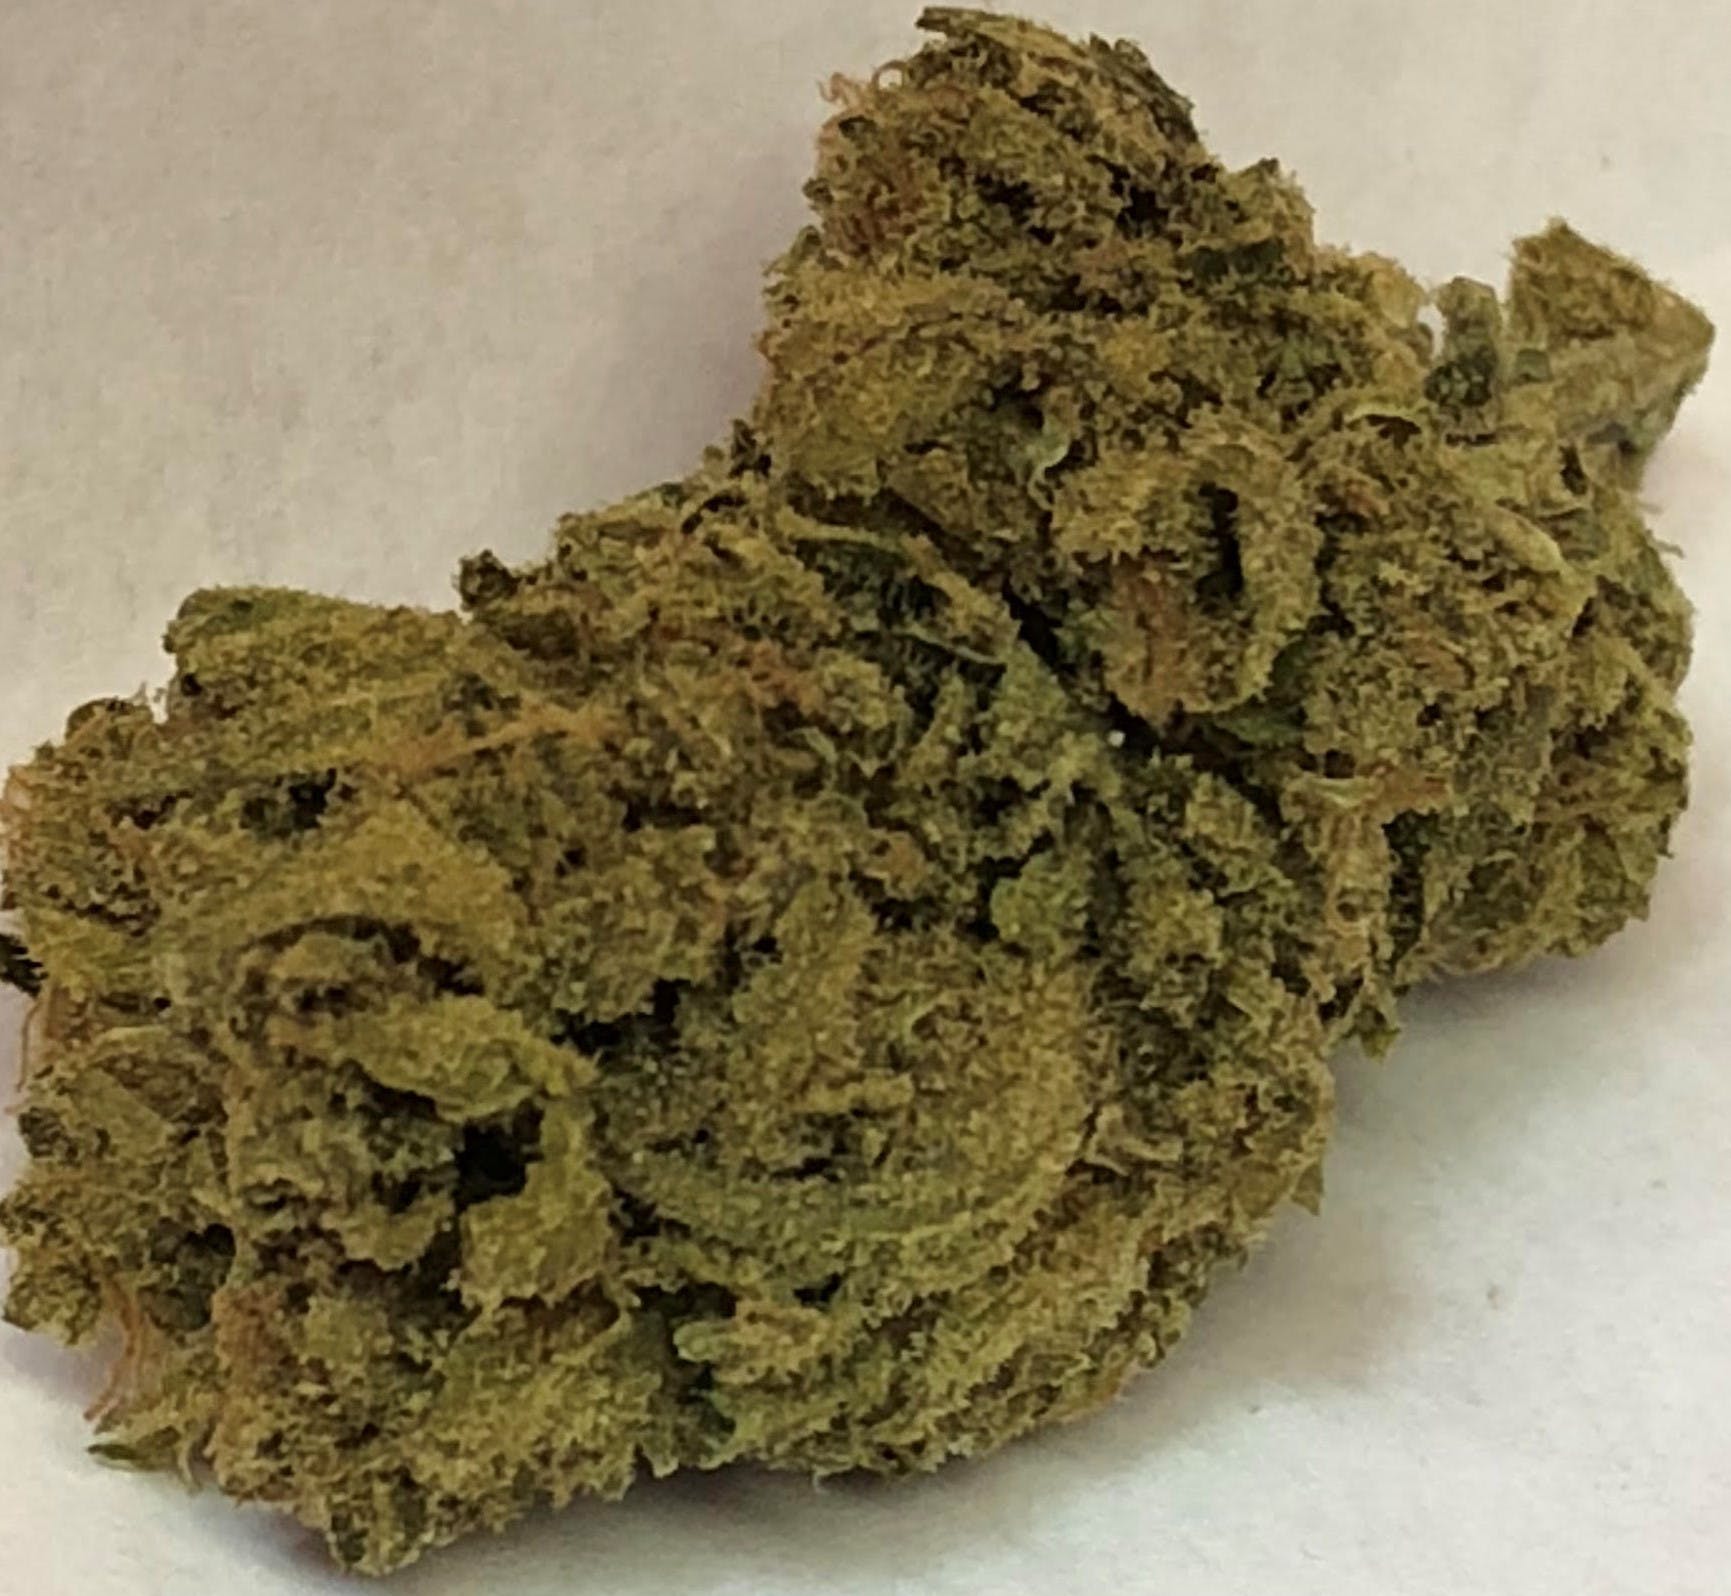 sativa-special-sour-circles-14g-40-2450-or-28g-40-24100